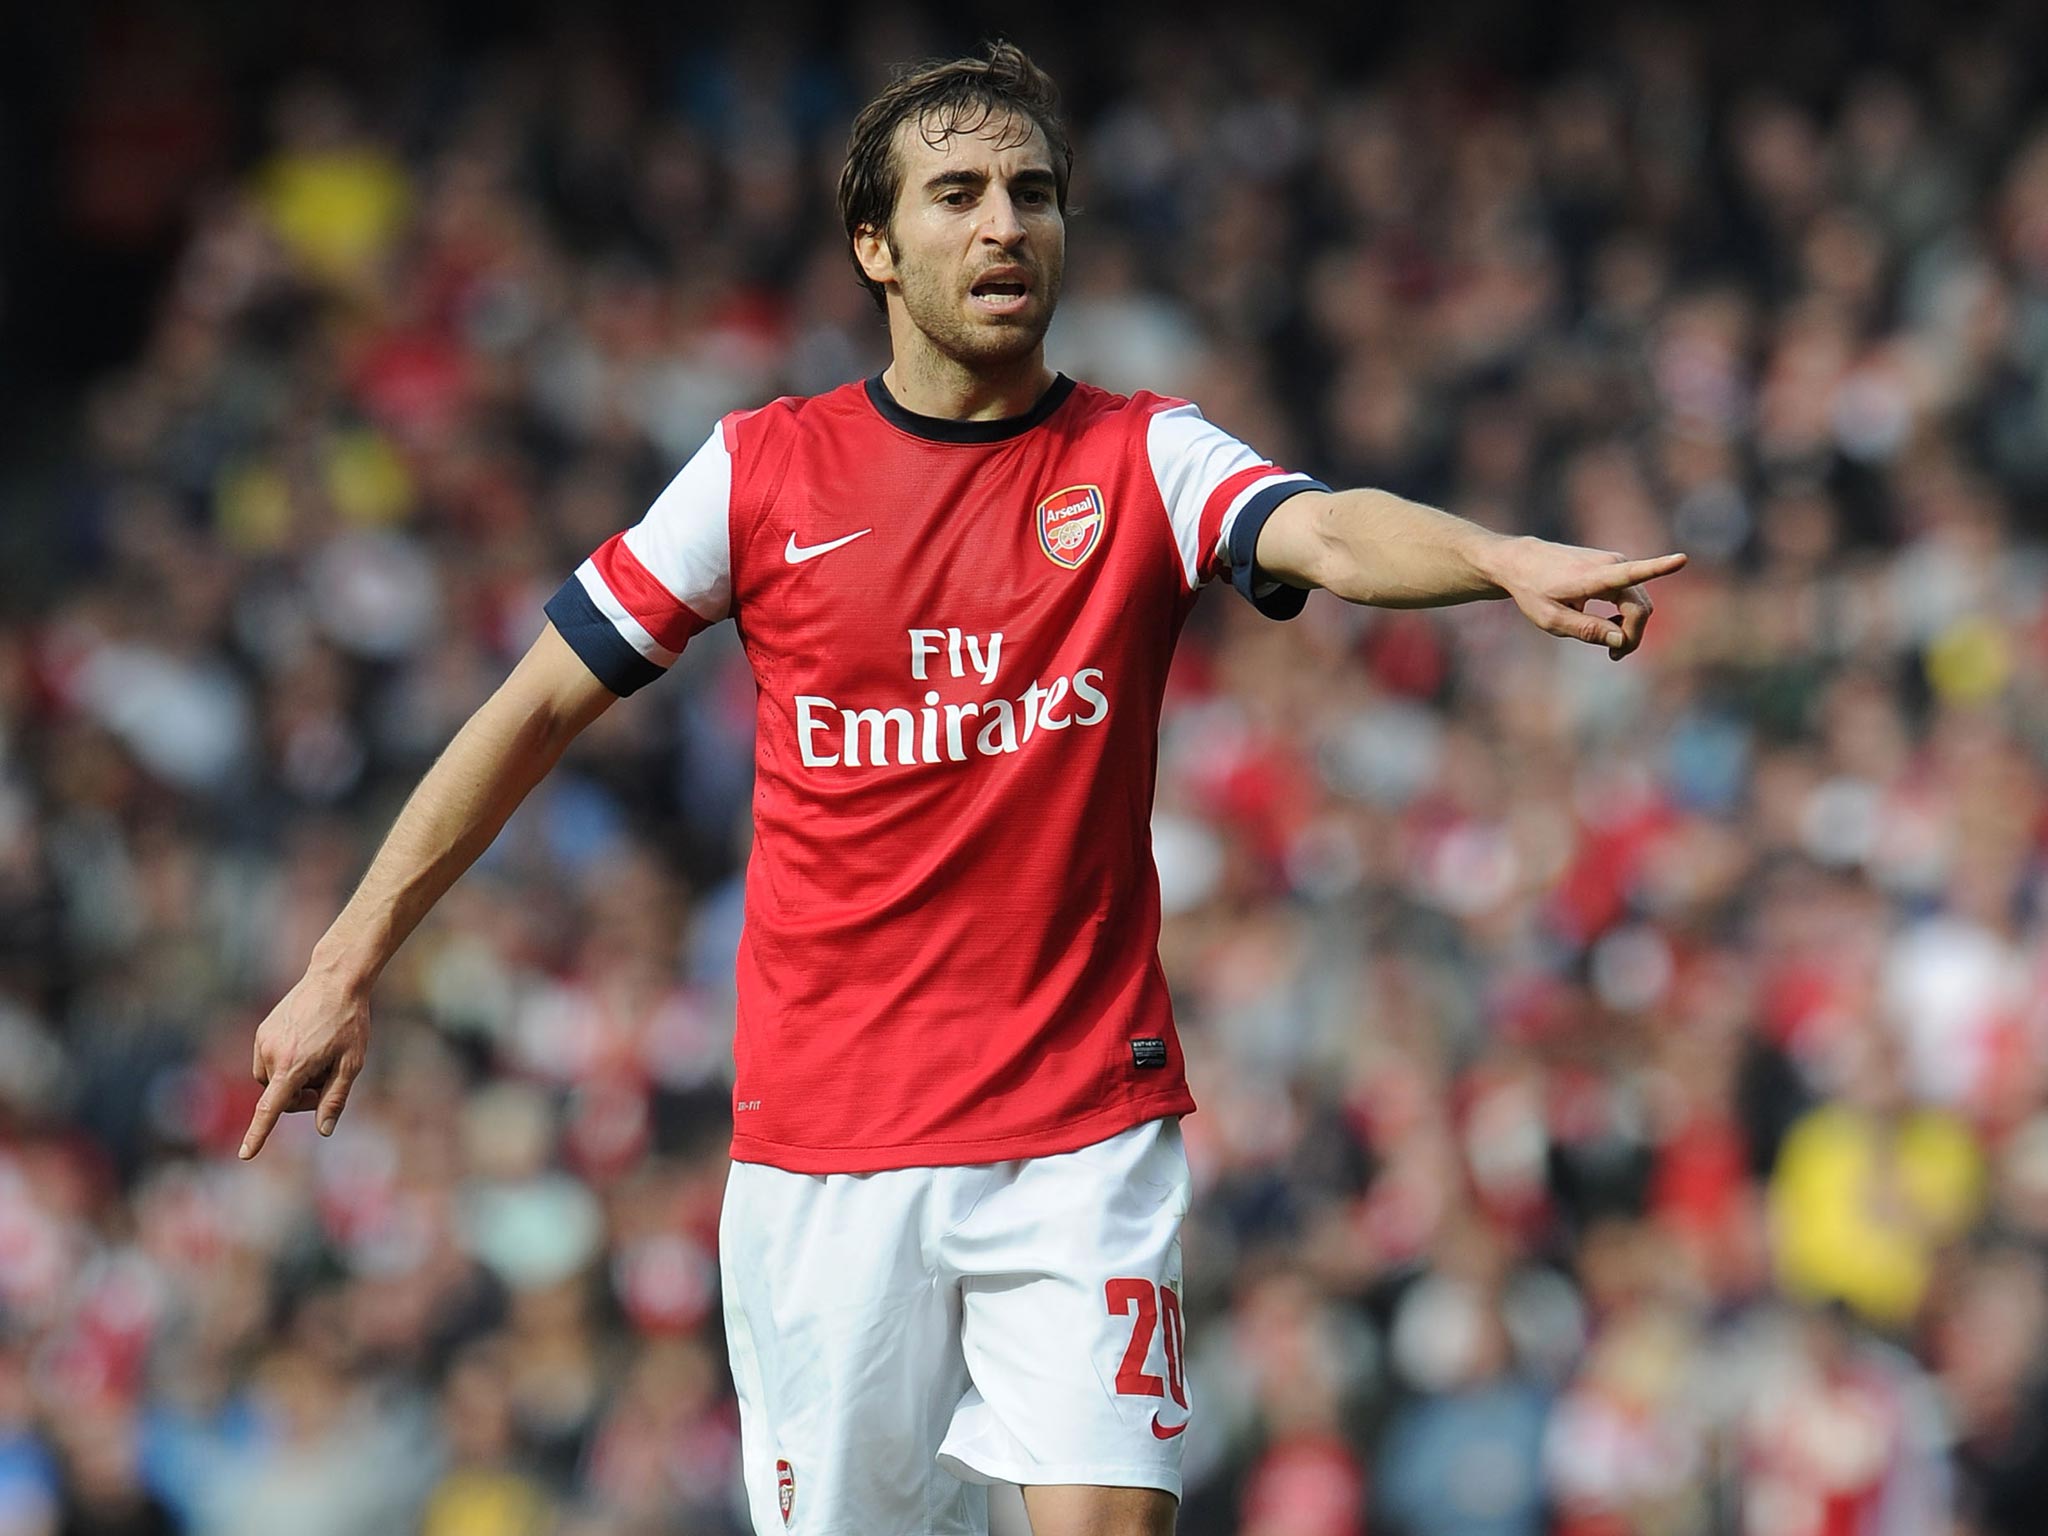 Mathieu Flamini believes a lack of character could be to blame for Arsenal's trophy drought but stresses the current will fight to secure success this season